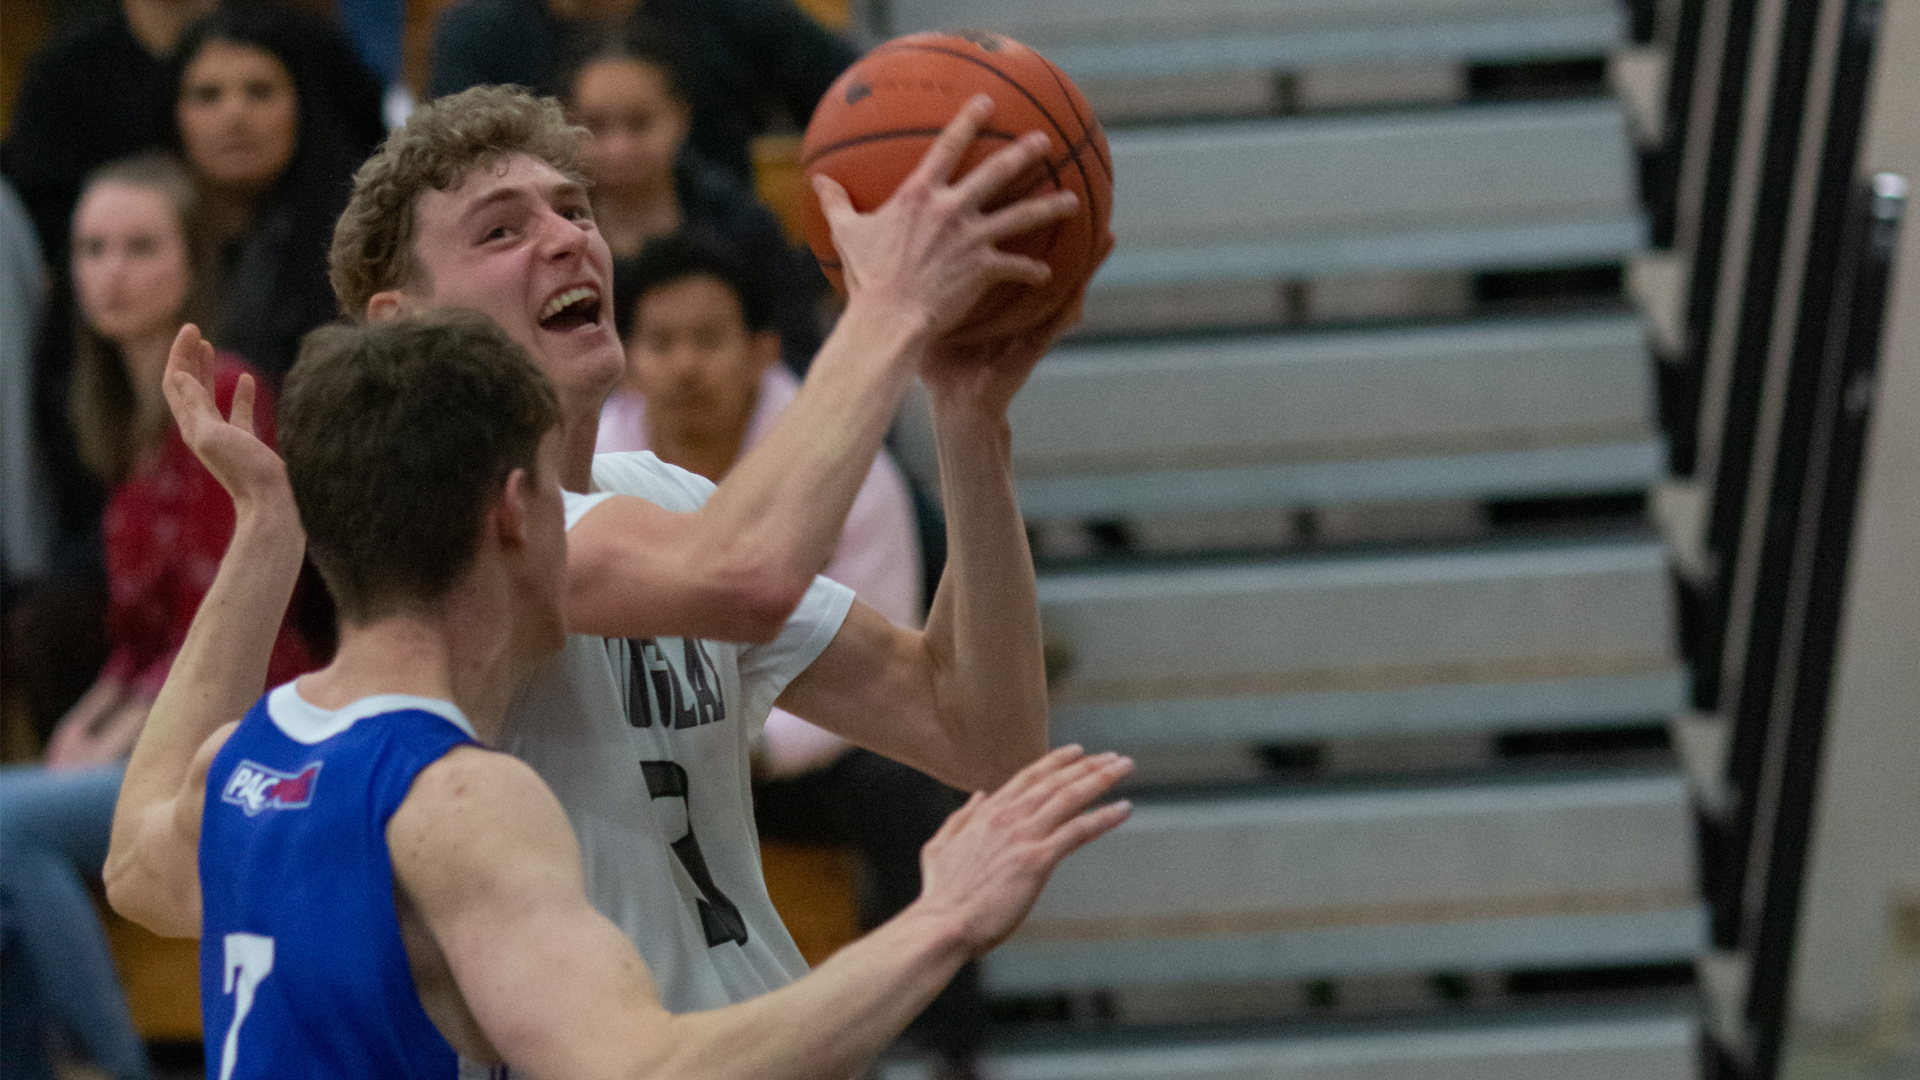 Cam Morris drives to the hoop against a Capilano defender